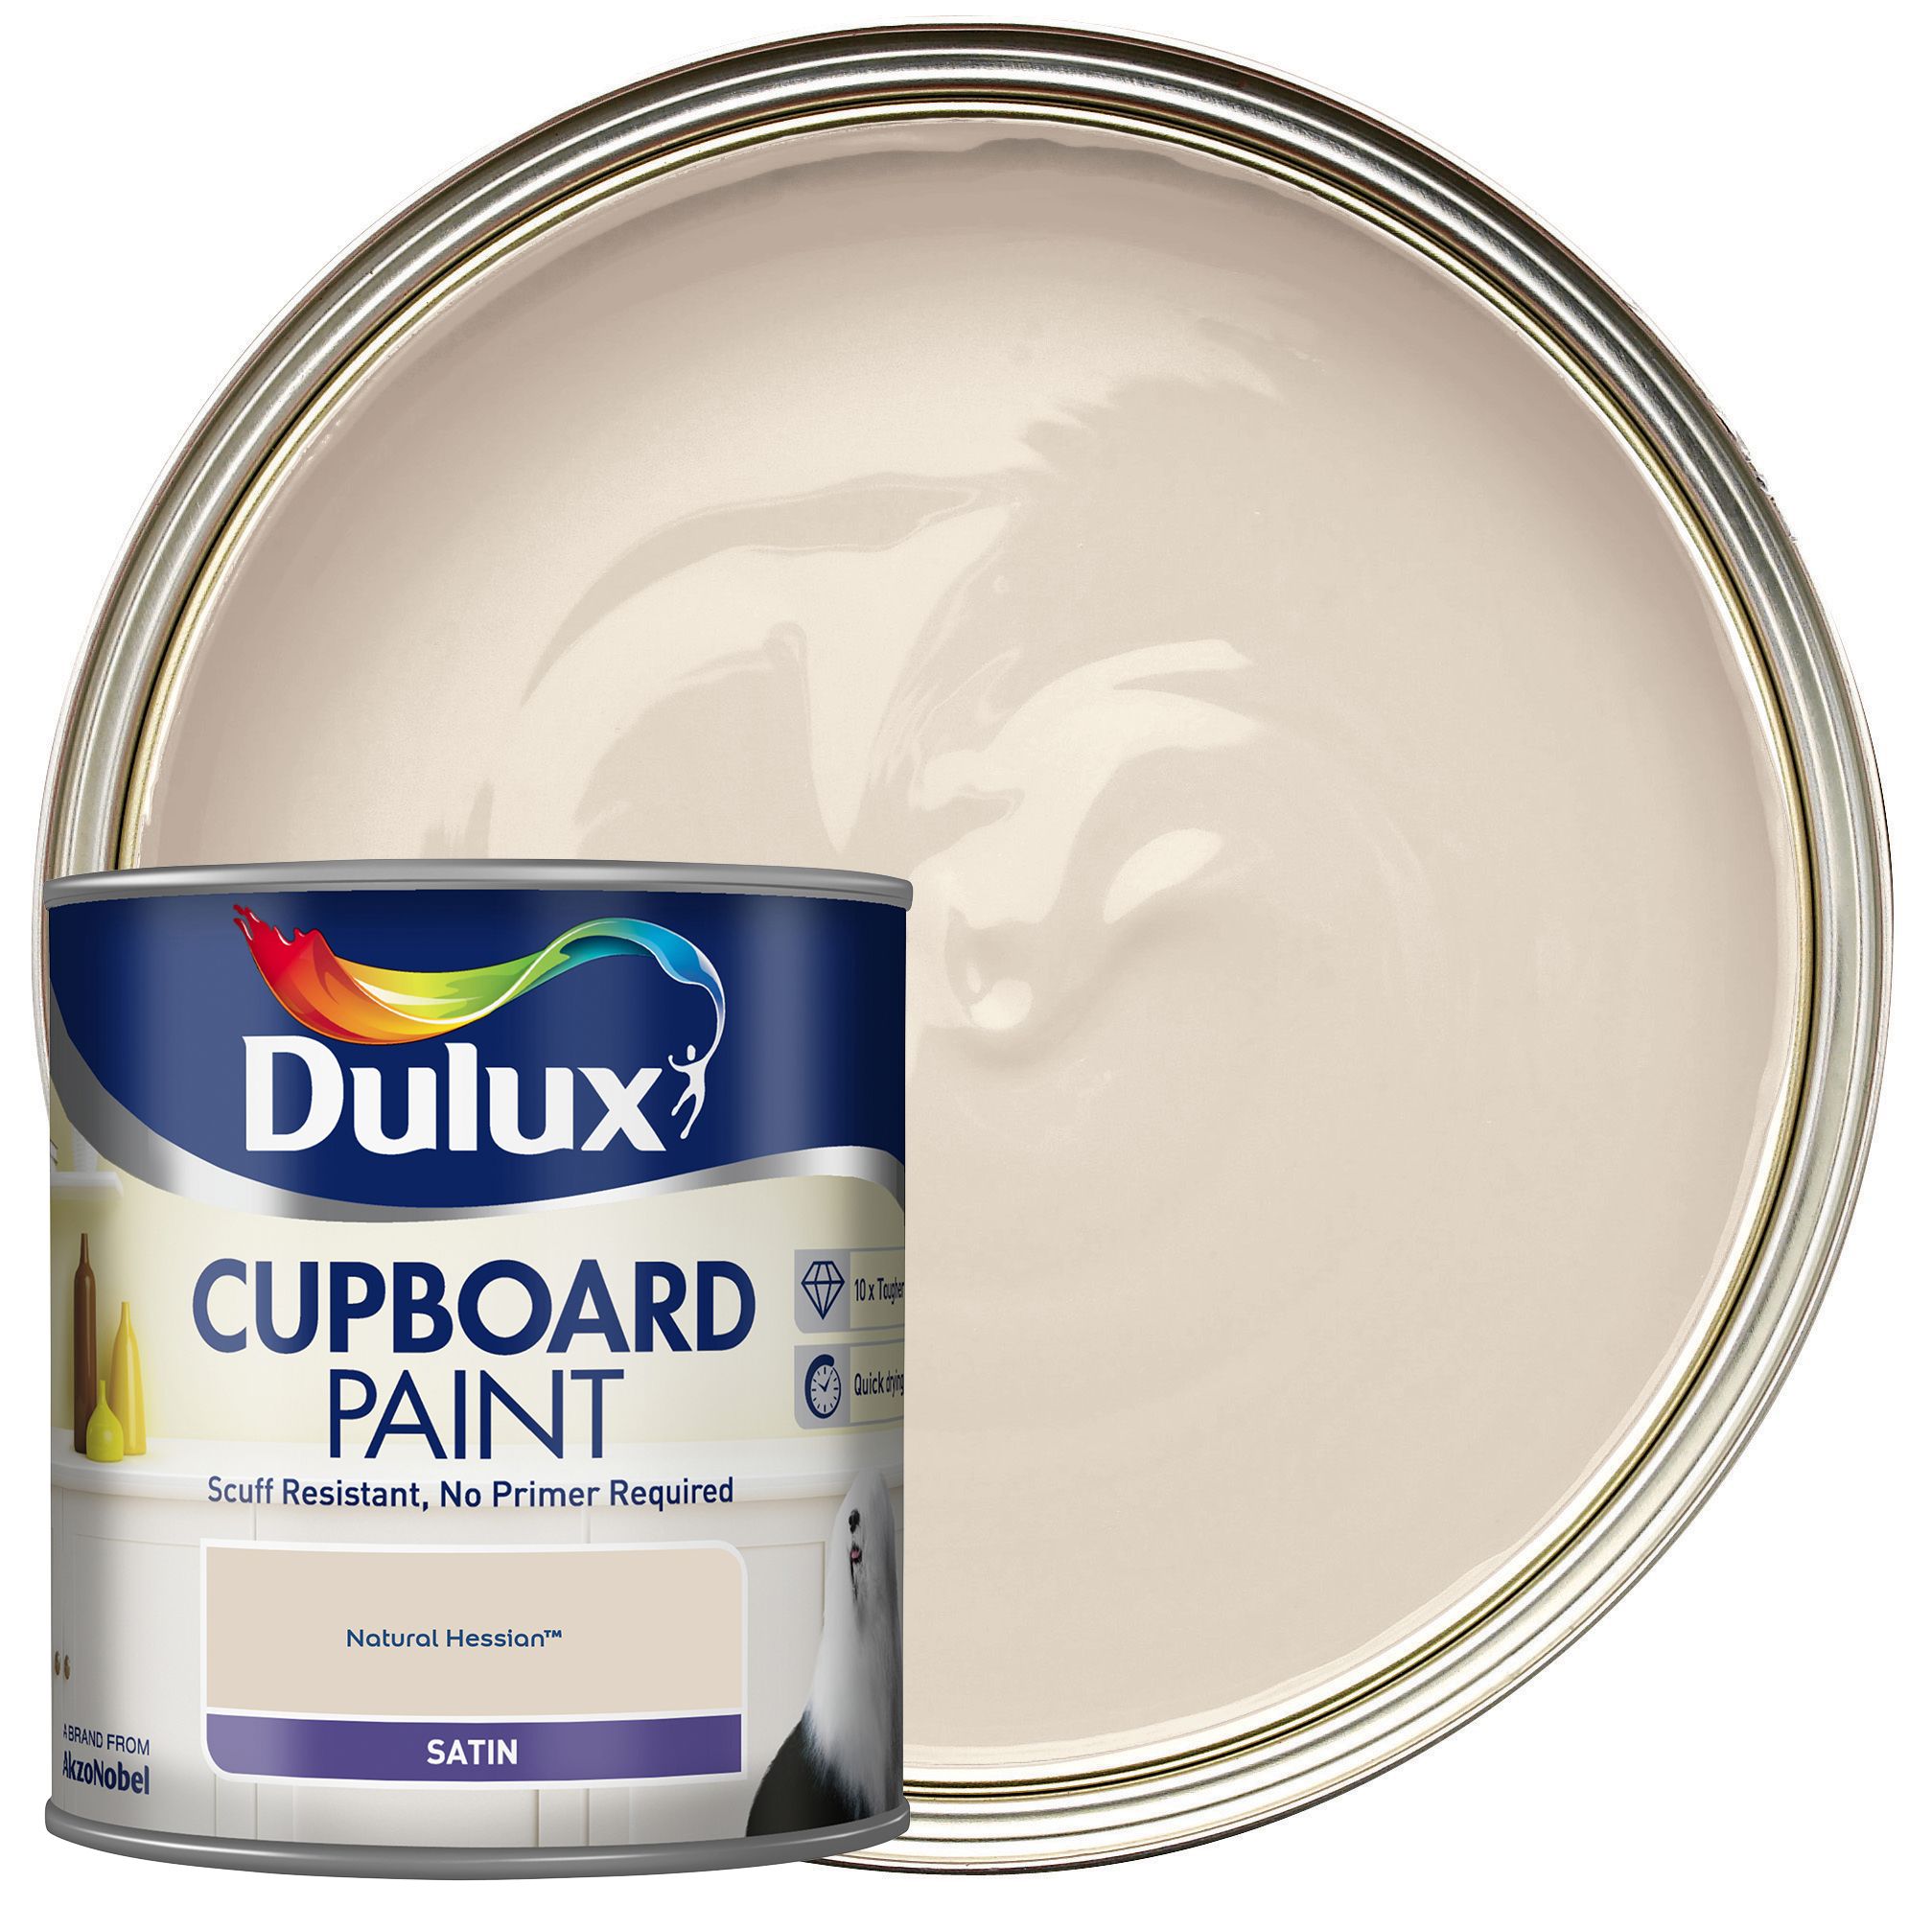 Image of Dulux Cupboard Paint - Natural Hessian - 600ml